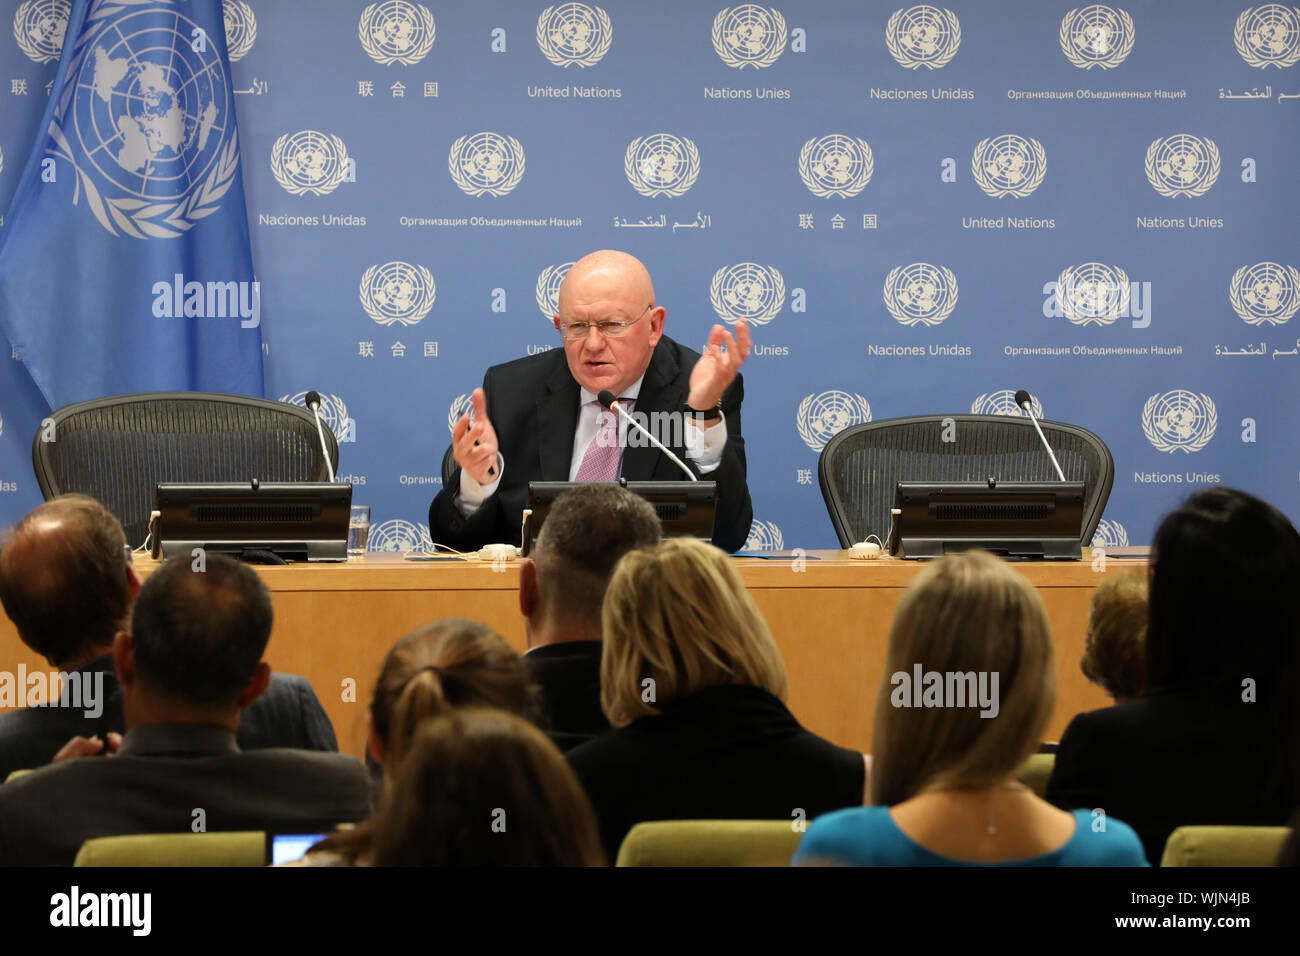 United Nations, UN headquarters in New York. 3rd Sep, 2019. Vassily Nebenzia (Rear), Russia's UN ambassador and president of the Security Council for the month of September, speaks to journalists during a press briefing at the UN headquarters in New York, on Sept. 3, 2019. United Nations Security Council will highlight UN cooperation with regional organizations and the settlement of African problems in September, Vassily Nebenzia said Tuesday. Credit: Ma Jianguo/Xinhua/Alamy Live News Stock Photo